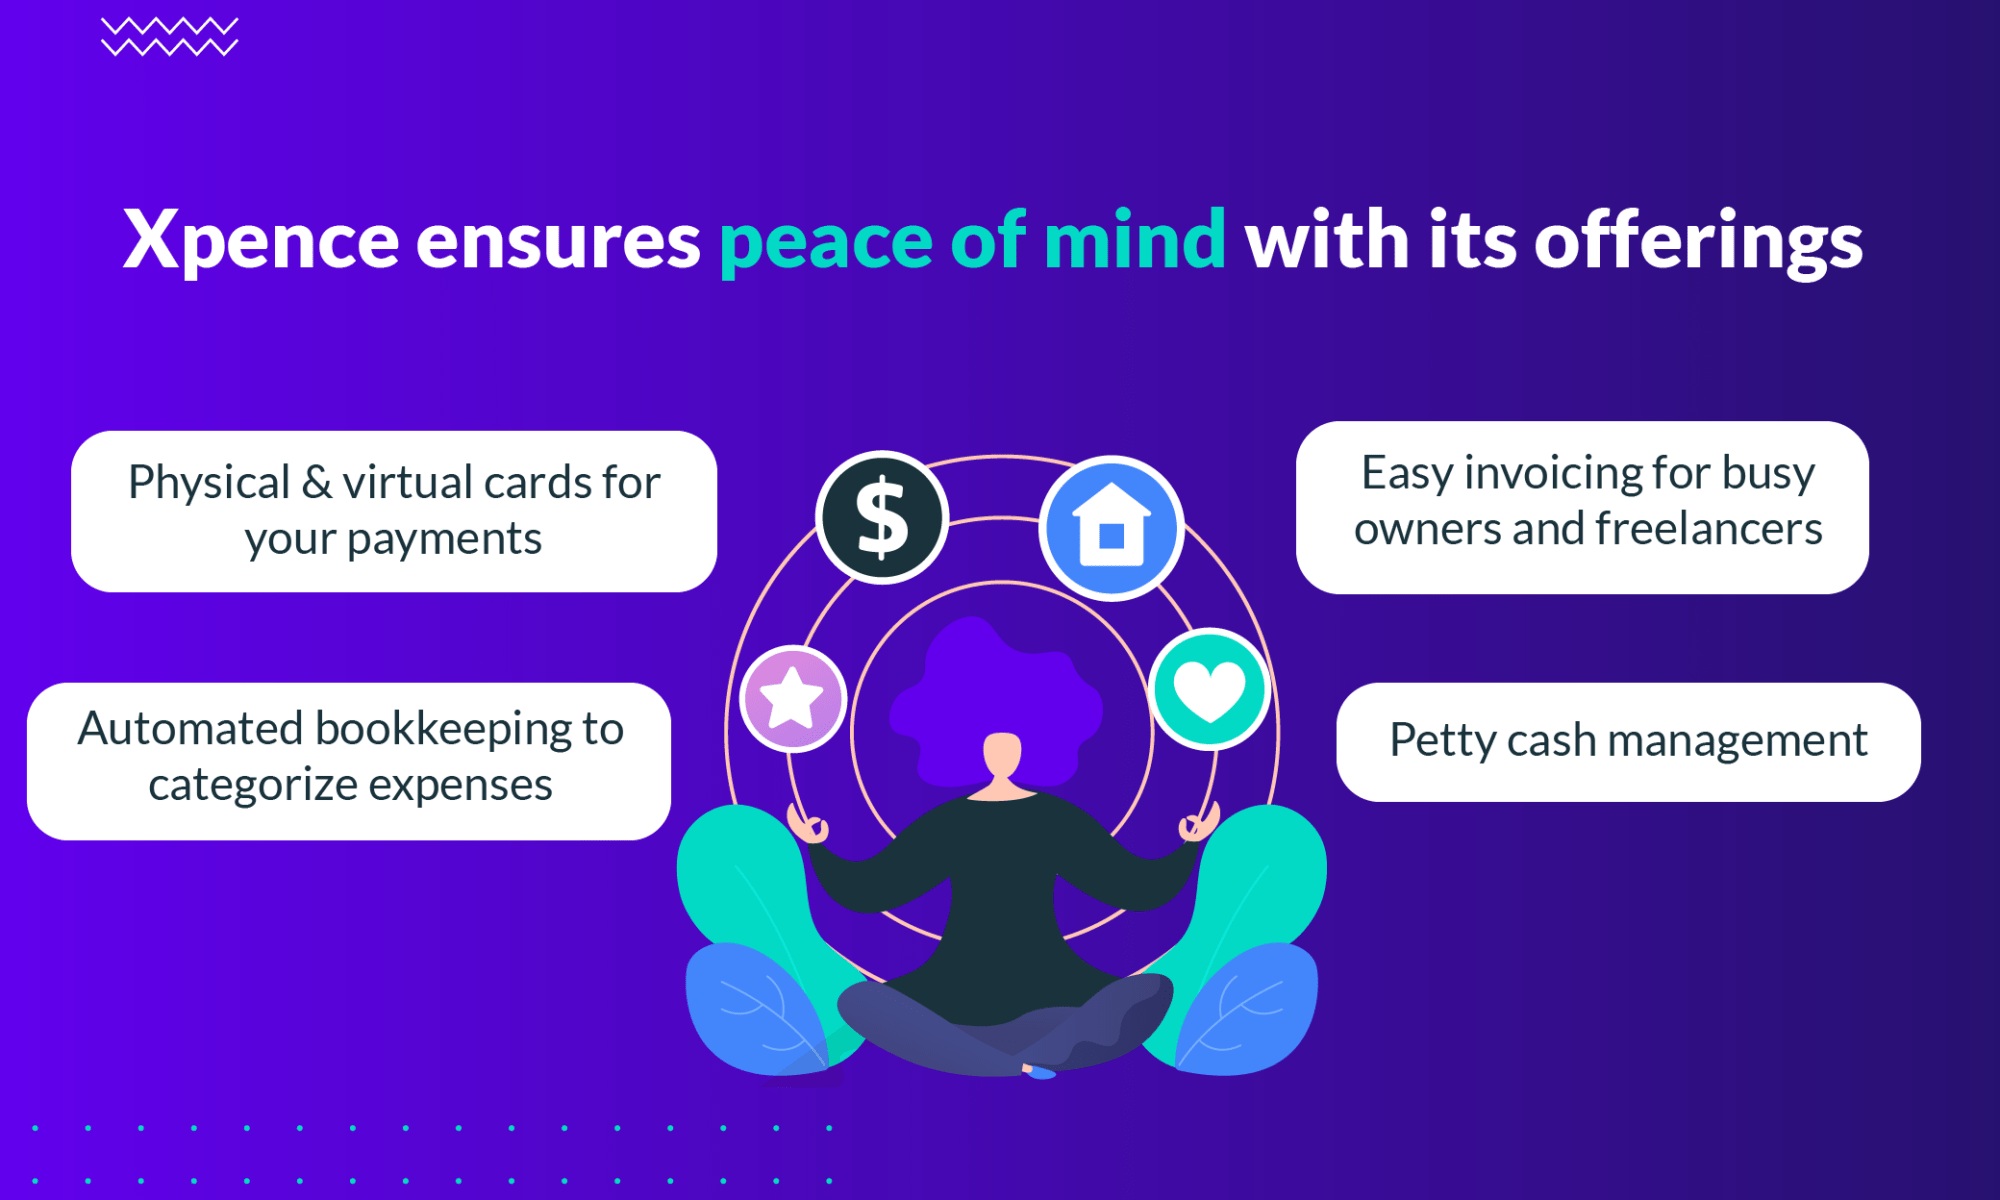 Using Xpence for Your Business Can Give You Peace of Mind